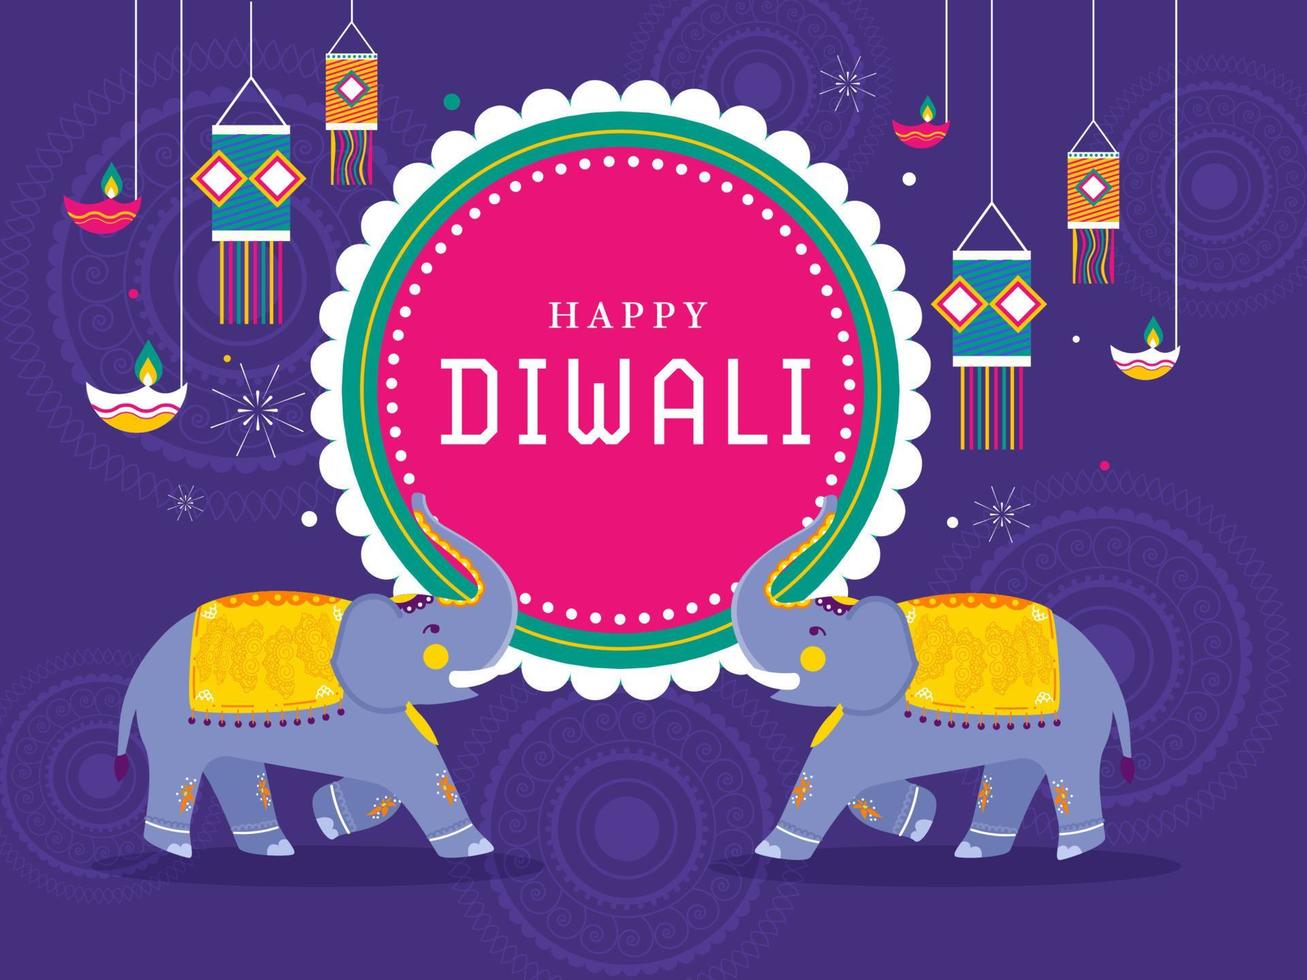 Happy Diwali Celebration Poster Design with Cartoon Two Elephants, Hanging Lanterns and Lit Oil Lamps Decorated on Blue Mandala Pattern Background. vector